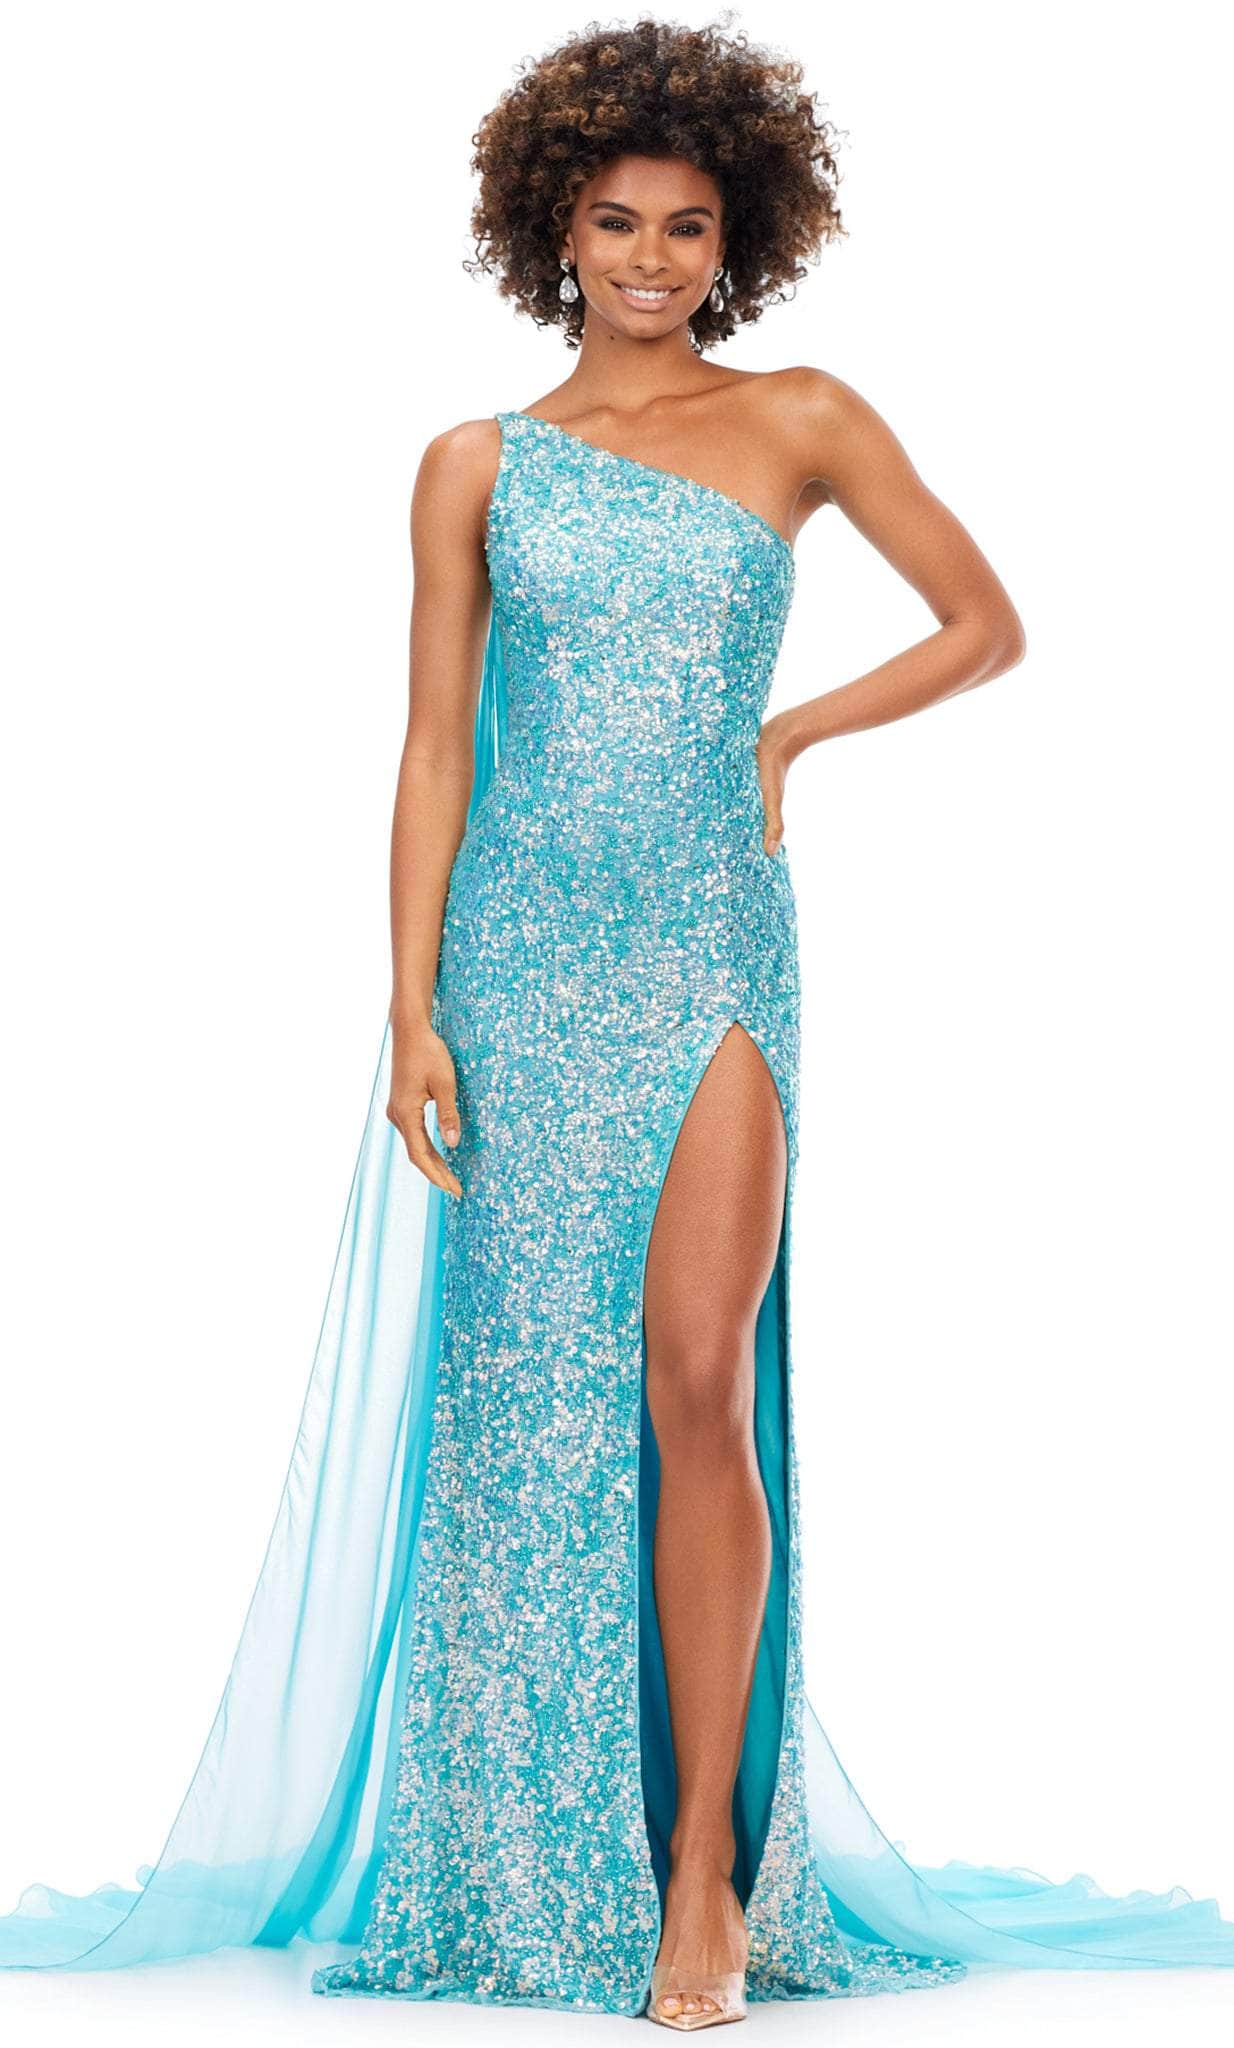 Image of Ashley Lauren 11371 - Asymmetric Sequin Prom Gown With Cape